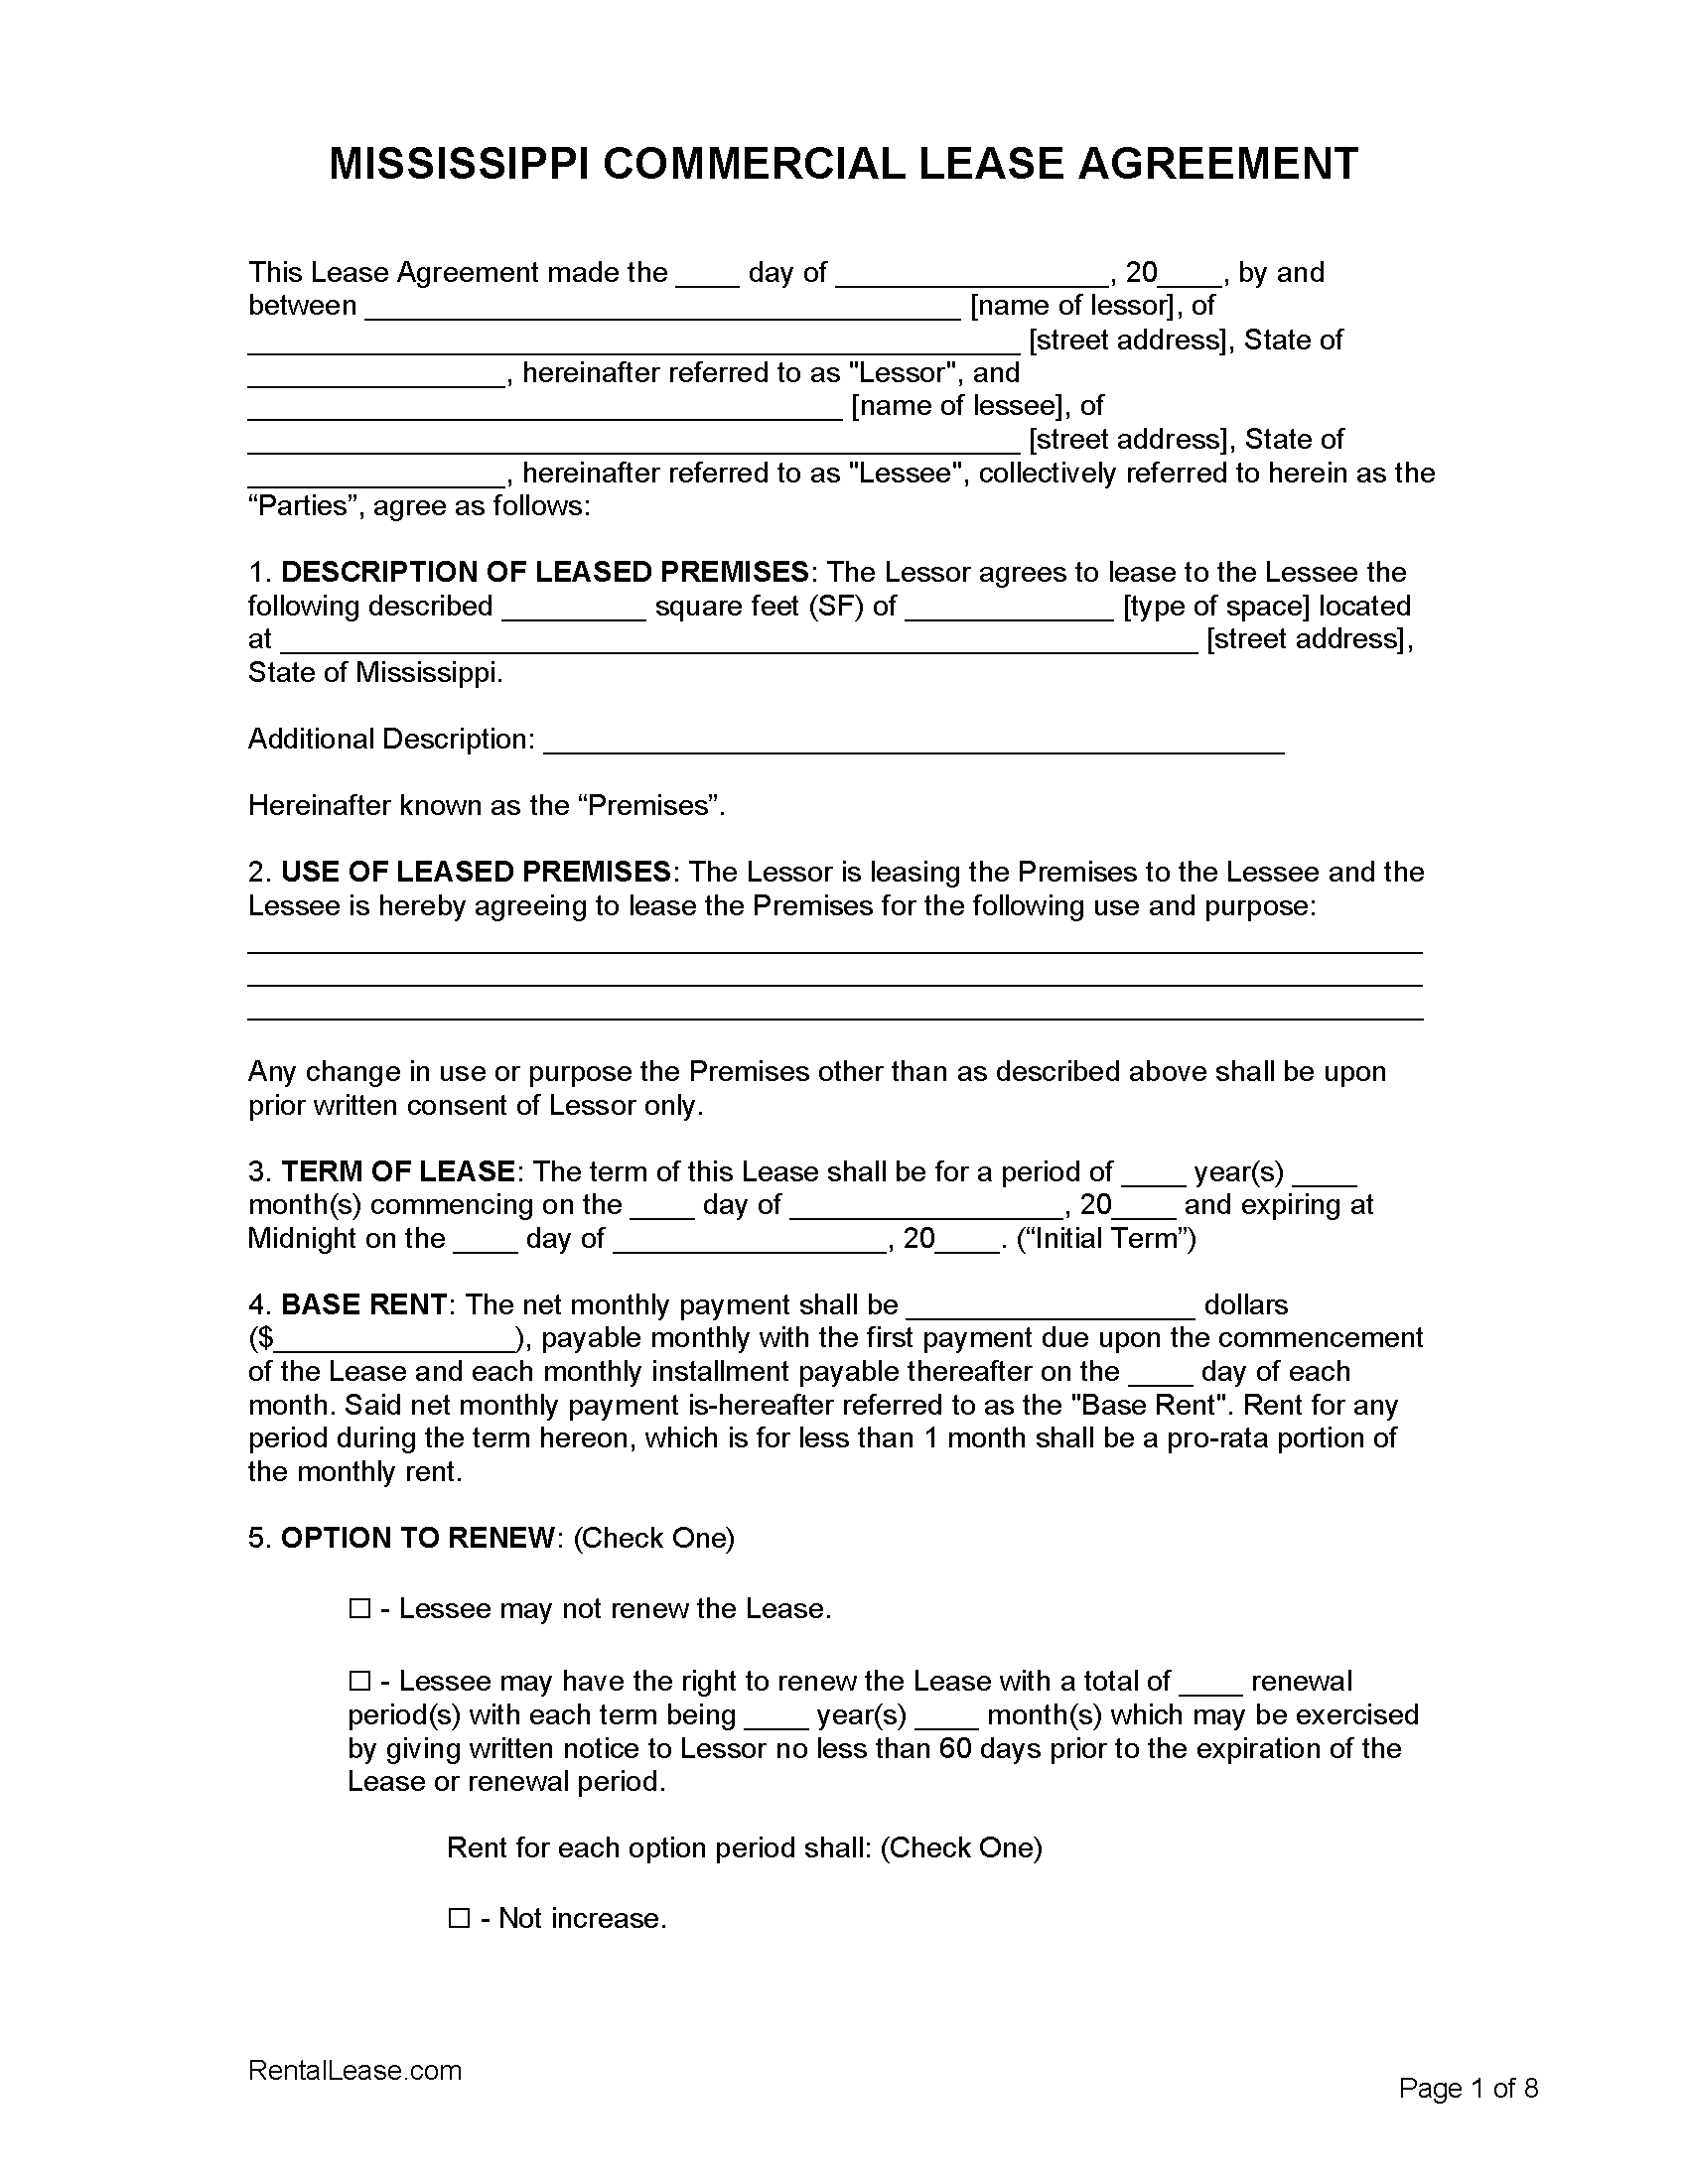 free-mississippi-commercial-lease-agreement-template-pdf-word